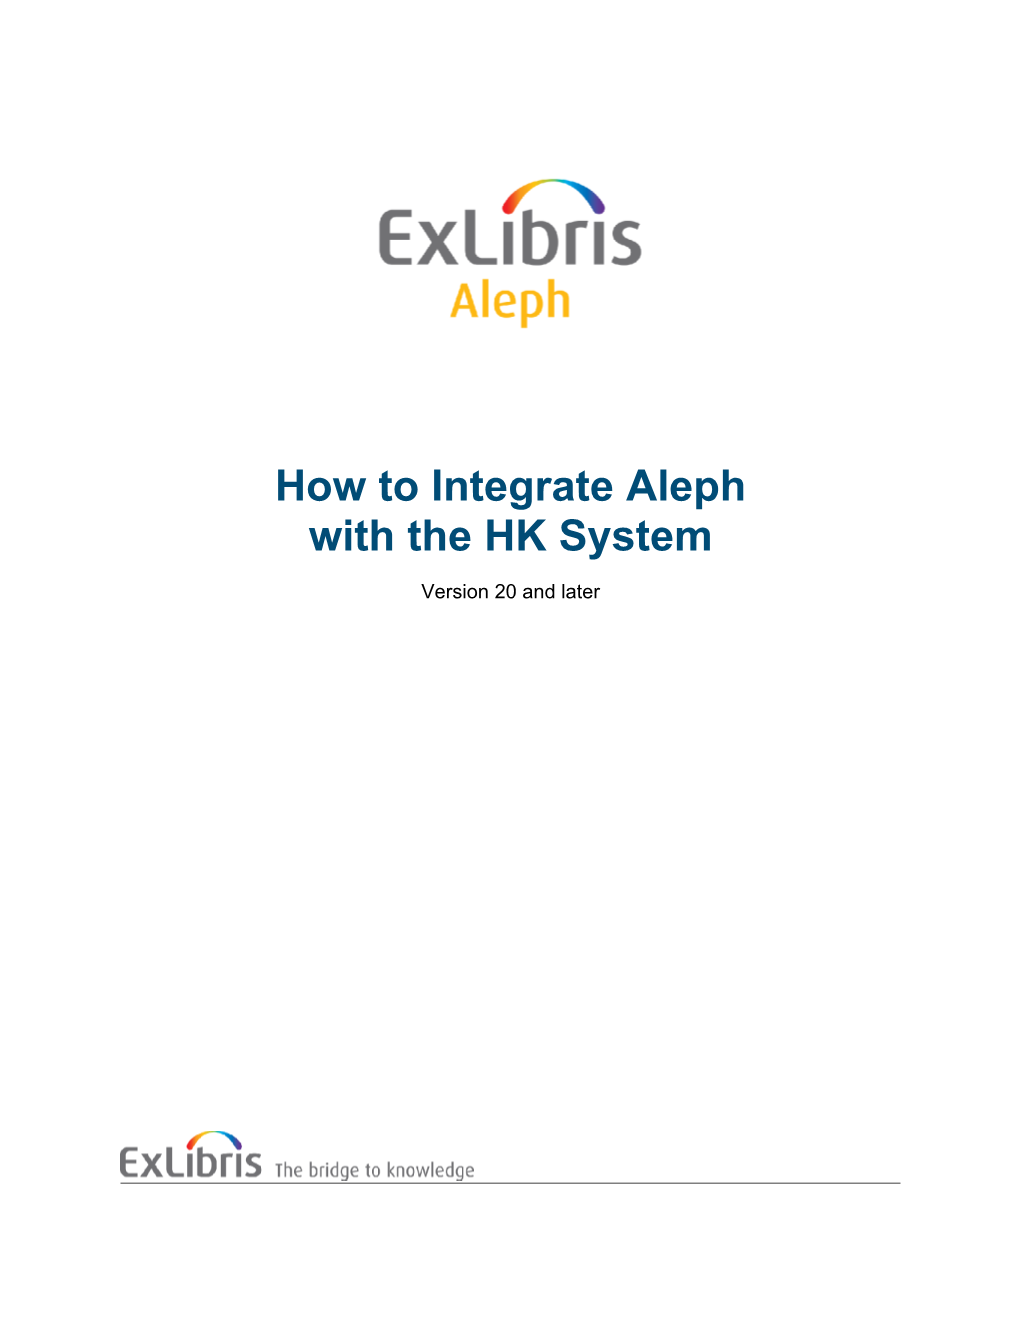 How to Integrate Aleph with the HK System